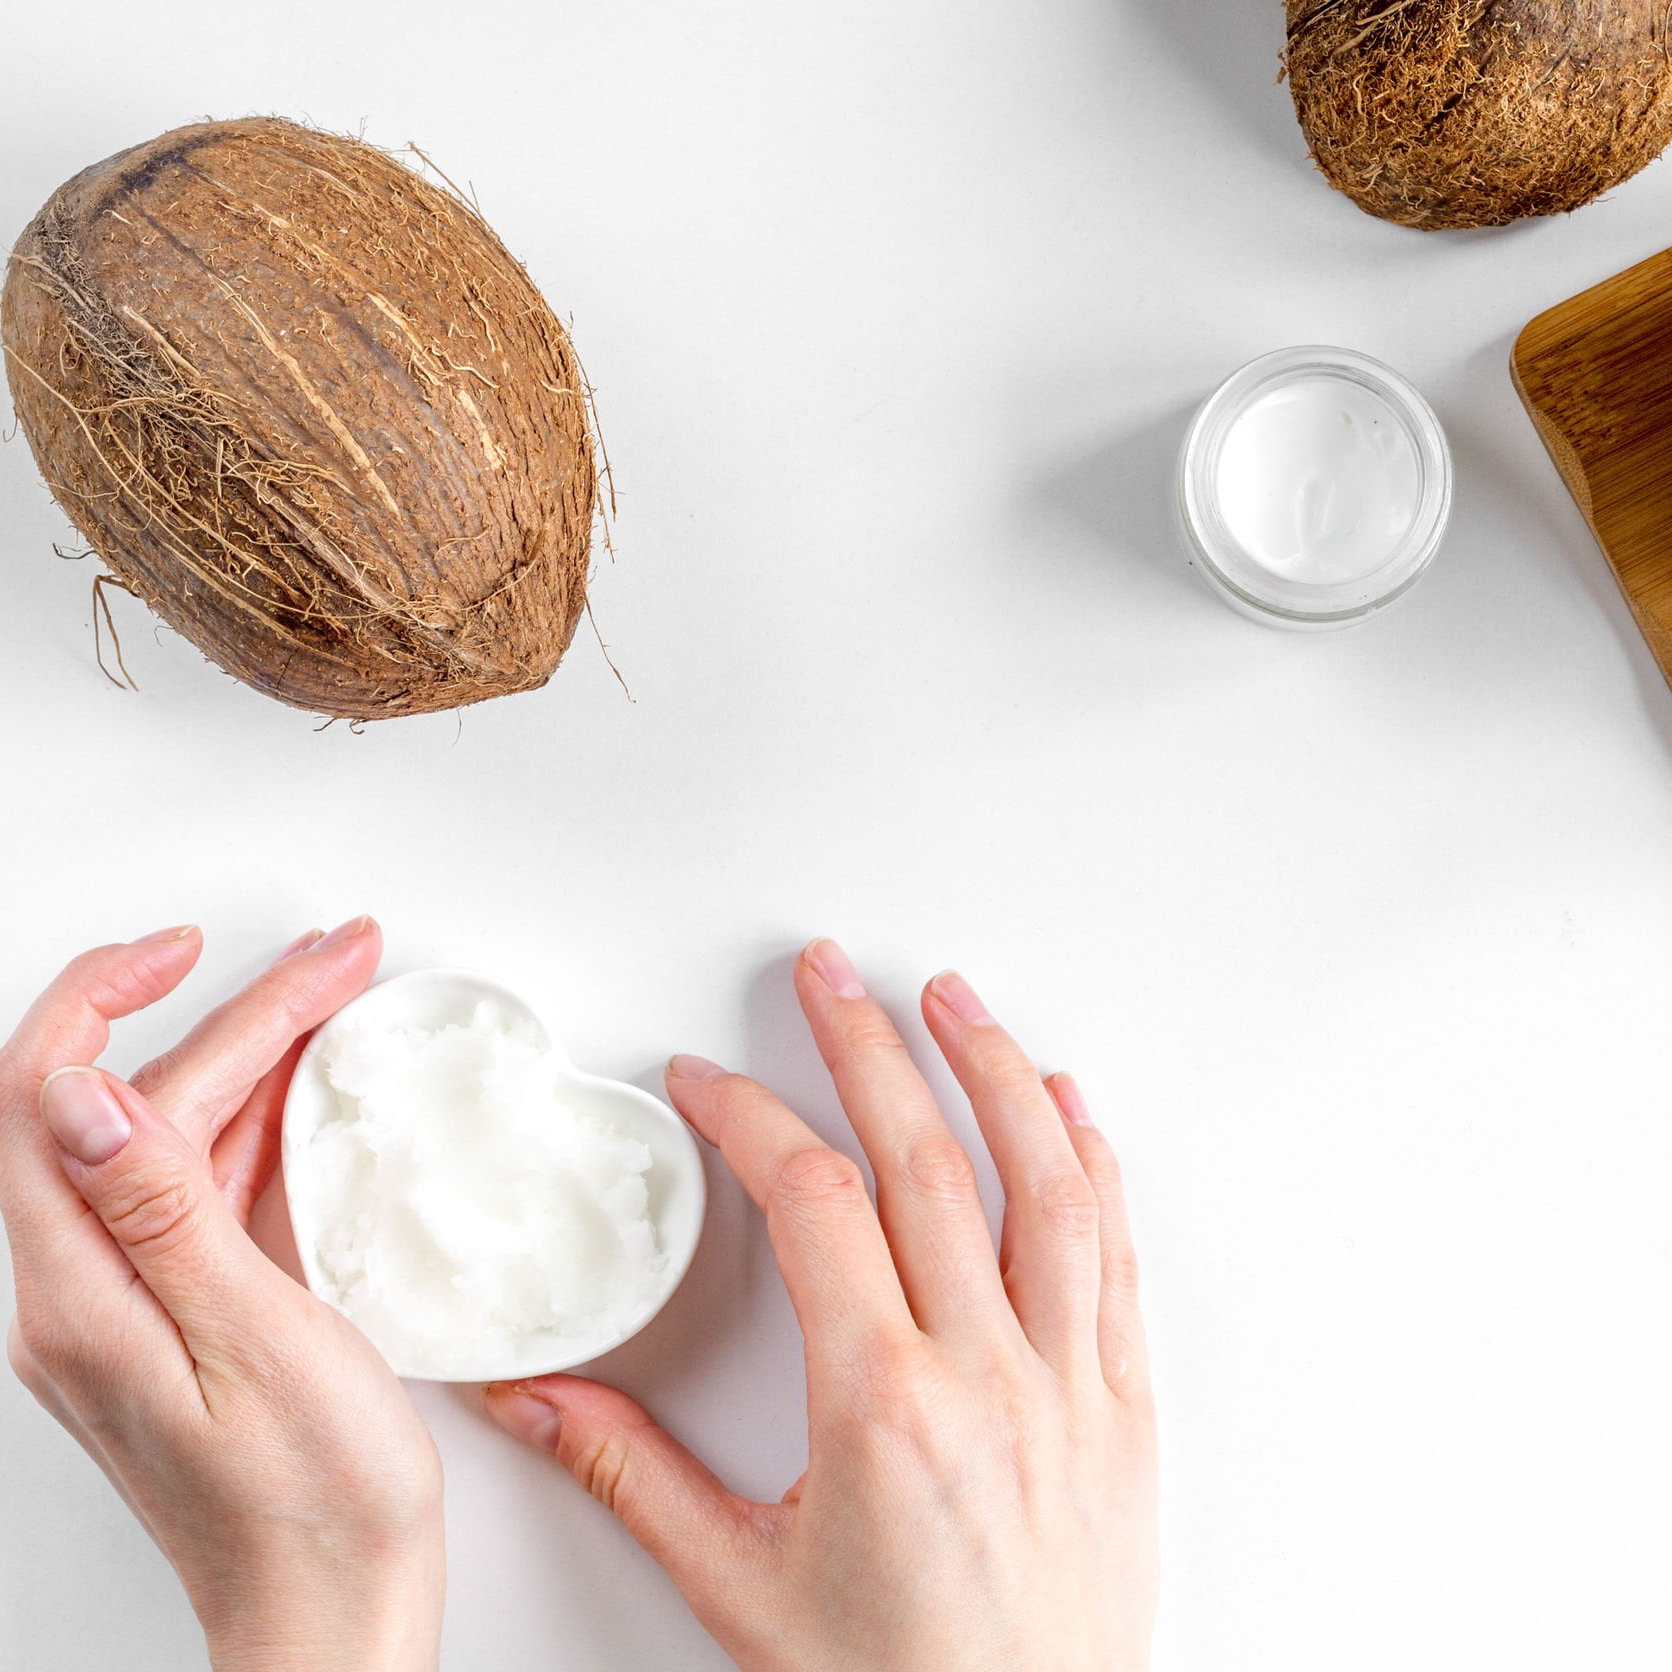 Baby Eczema, Coconut Oil, and What The Research Has To Say...